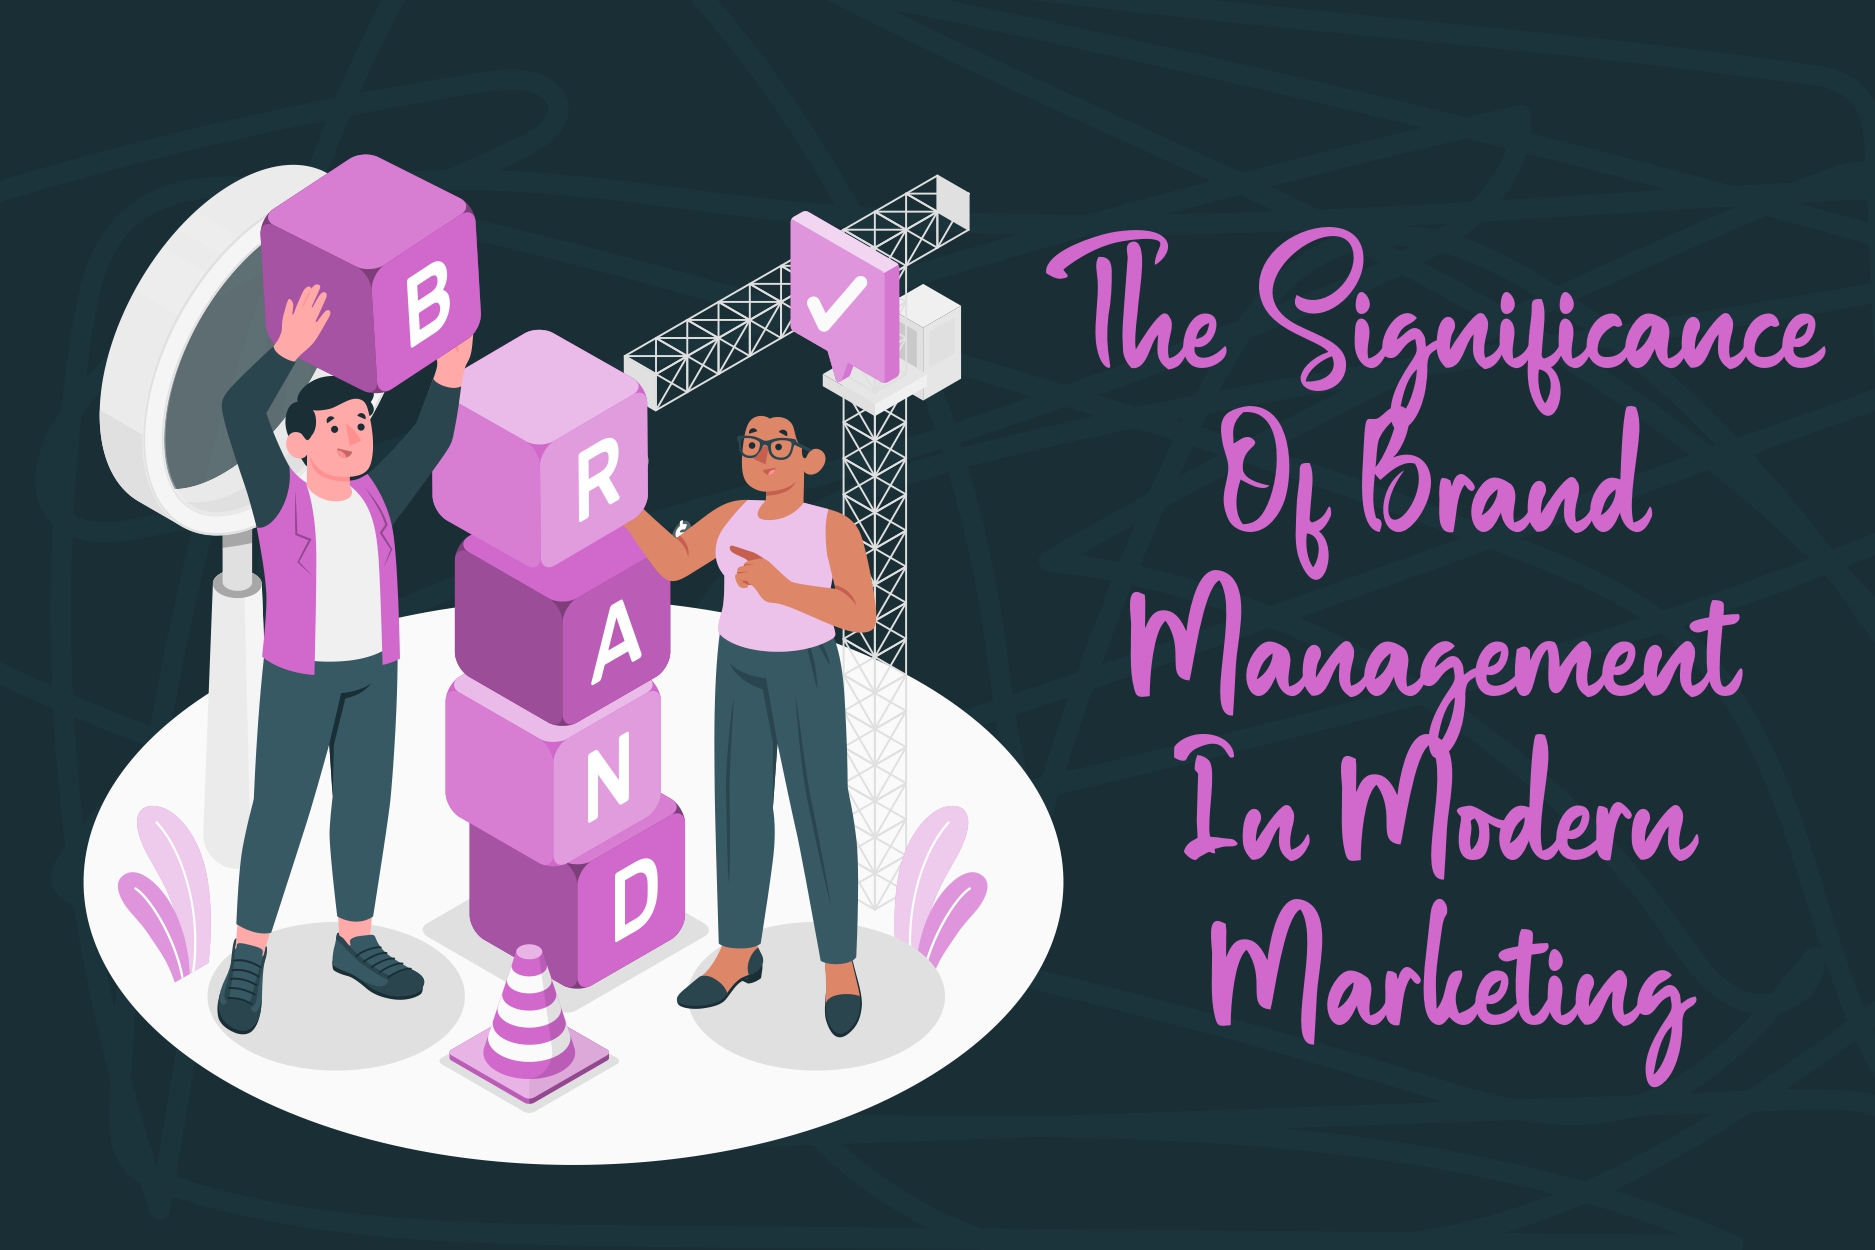 The Significance Of Brand Management In Modern Marketing